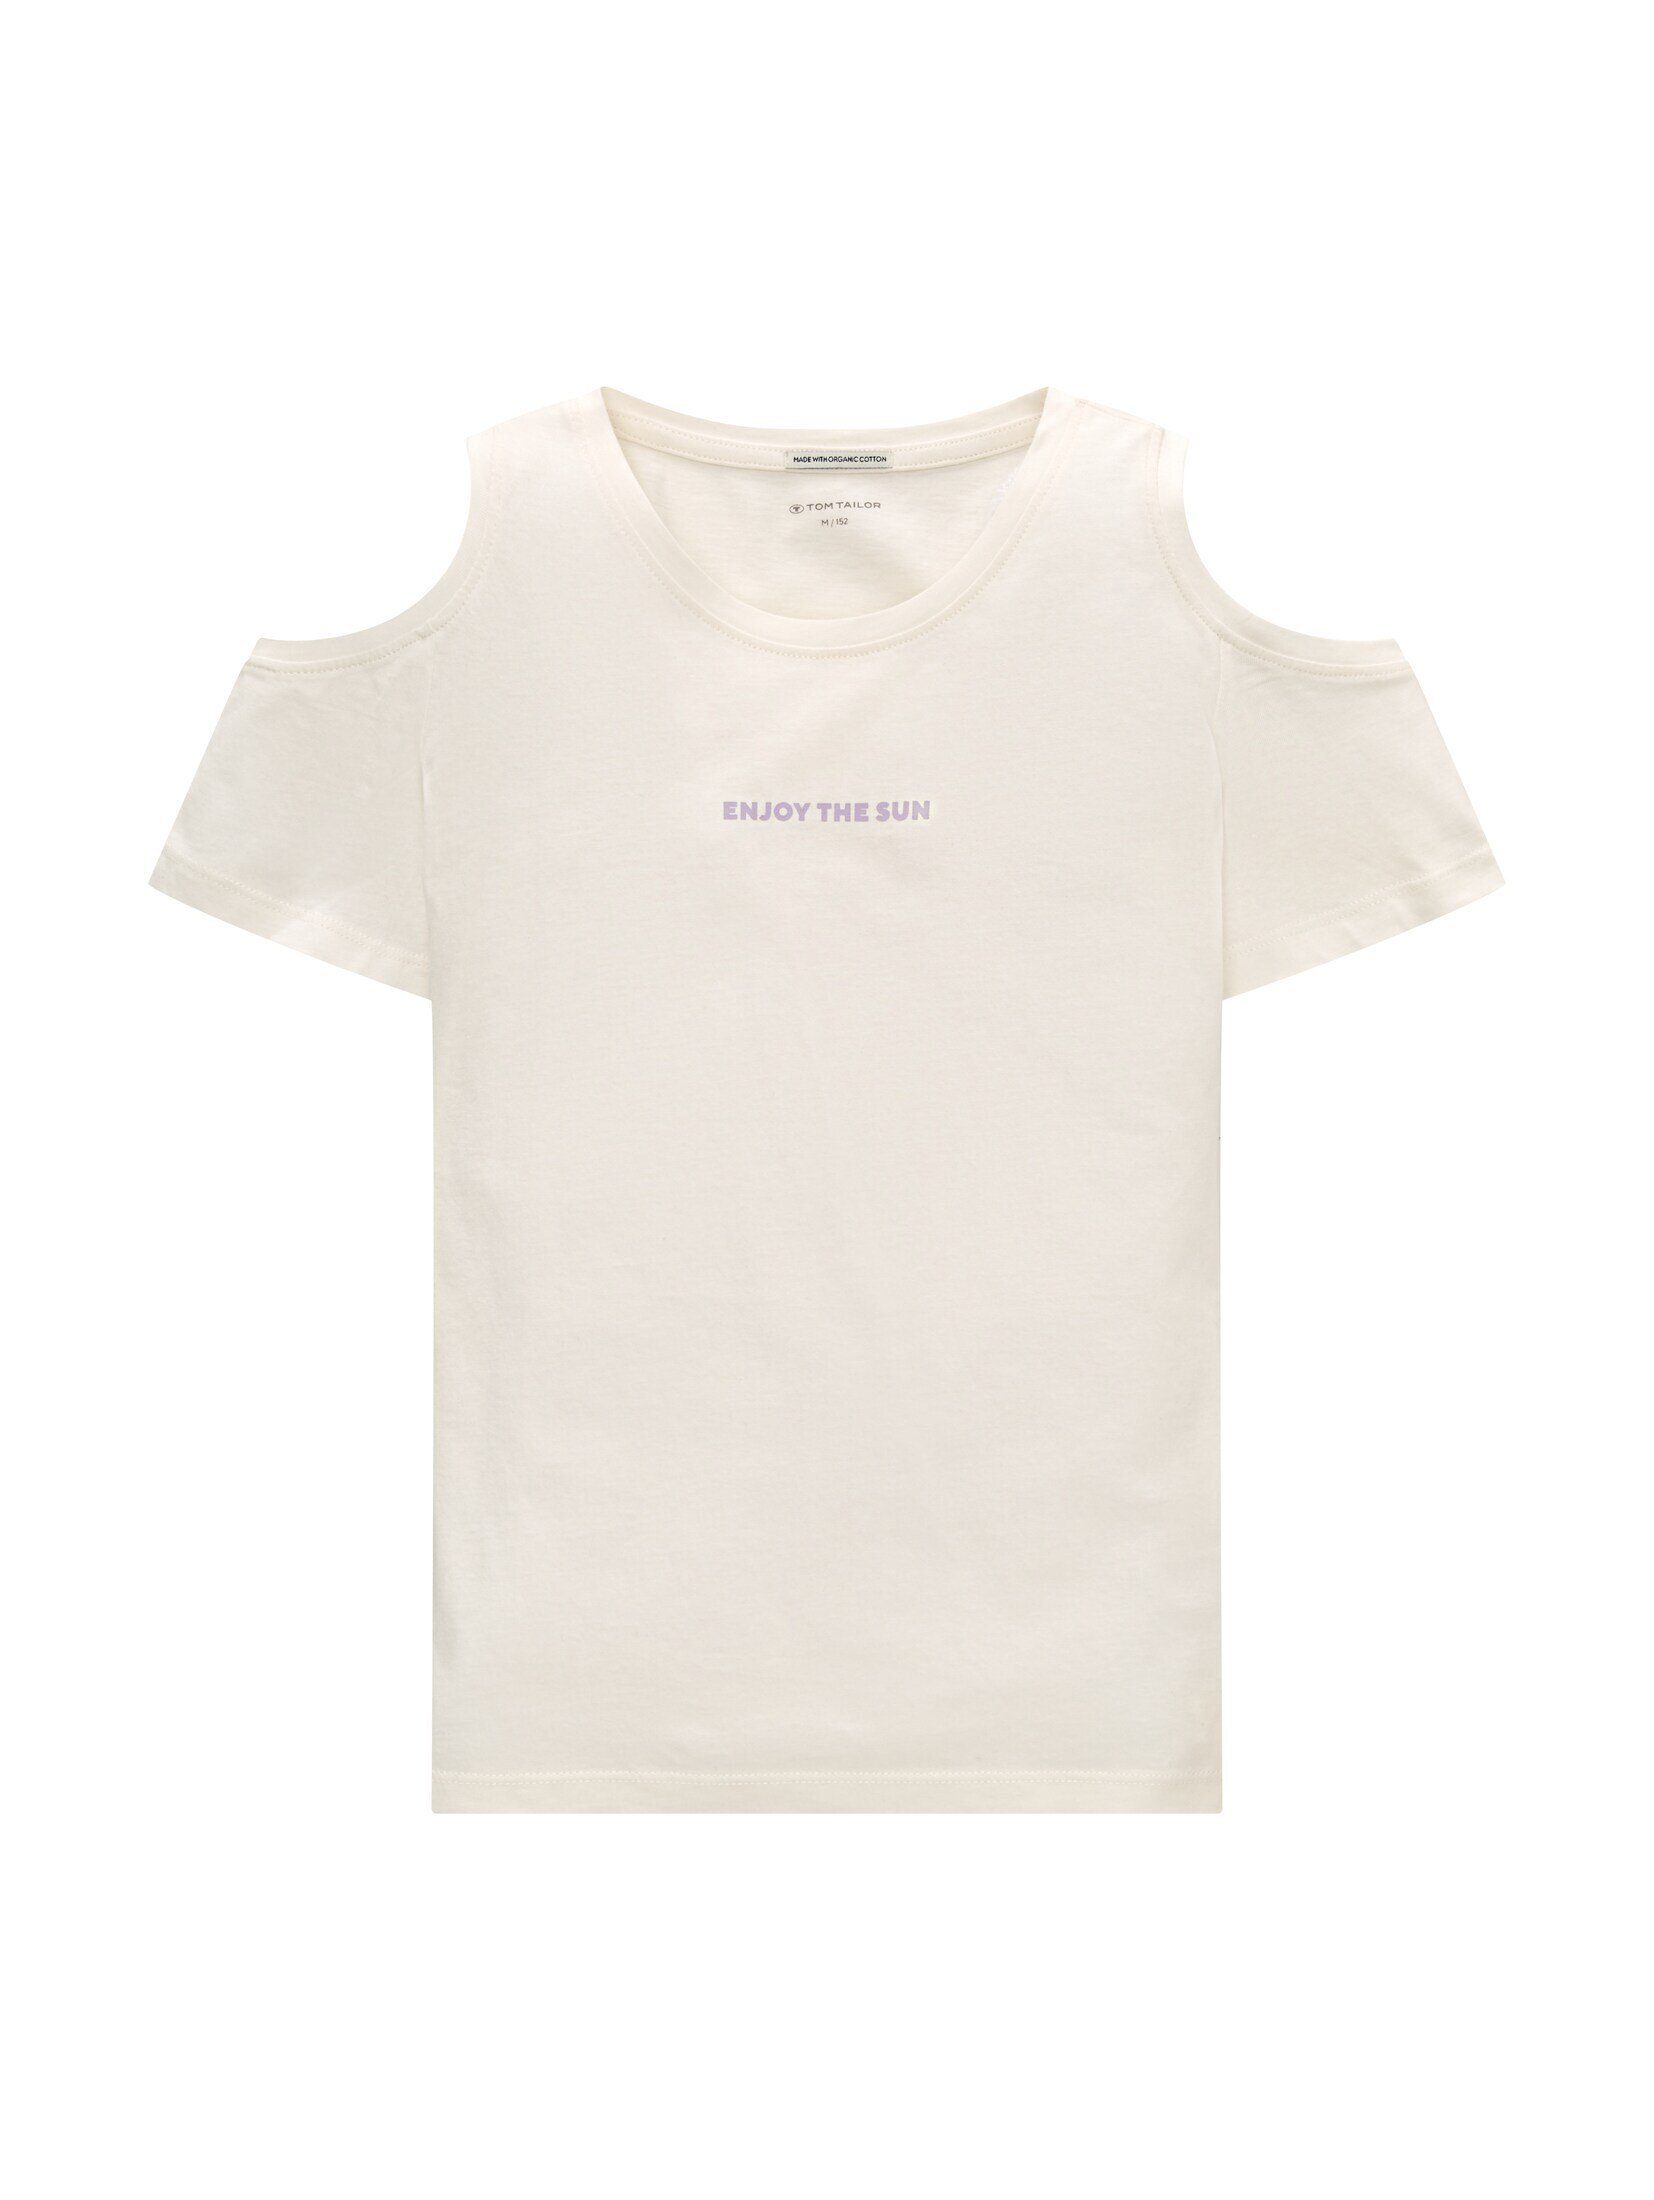 White T-Shirt Cut-Outs mit TOM TAILOR Wool T-Shirt